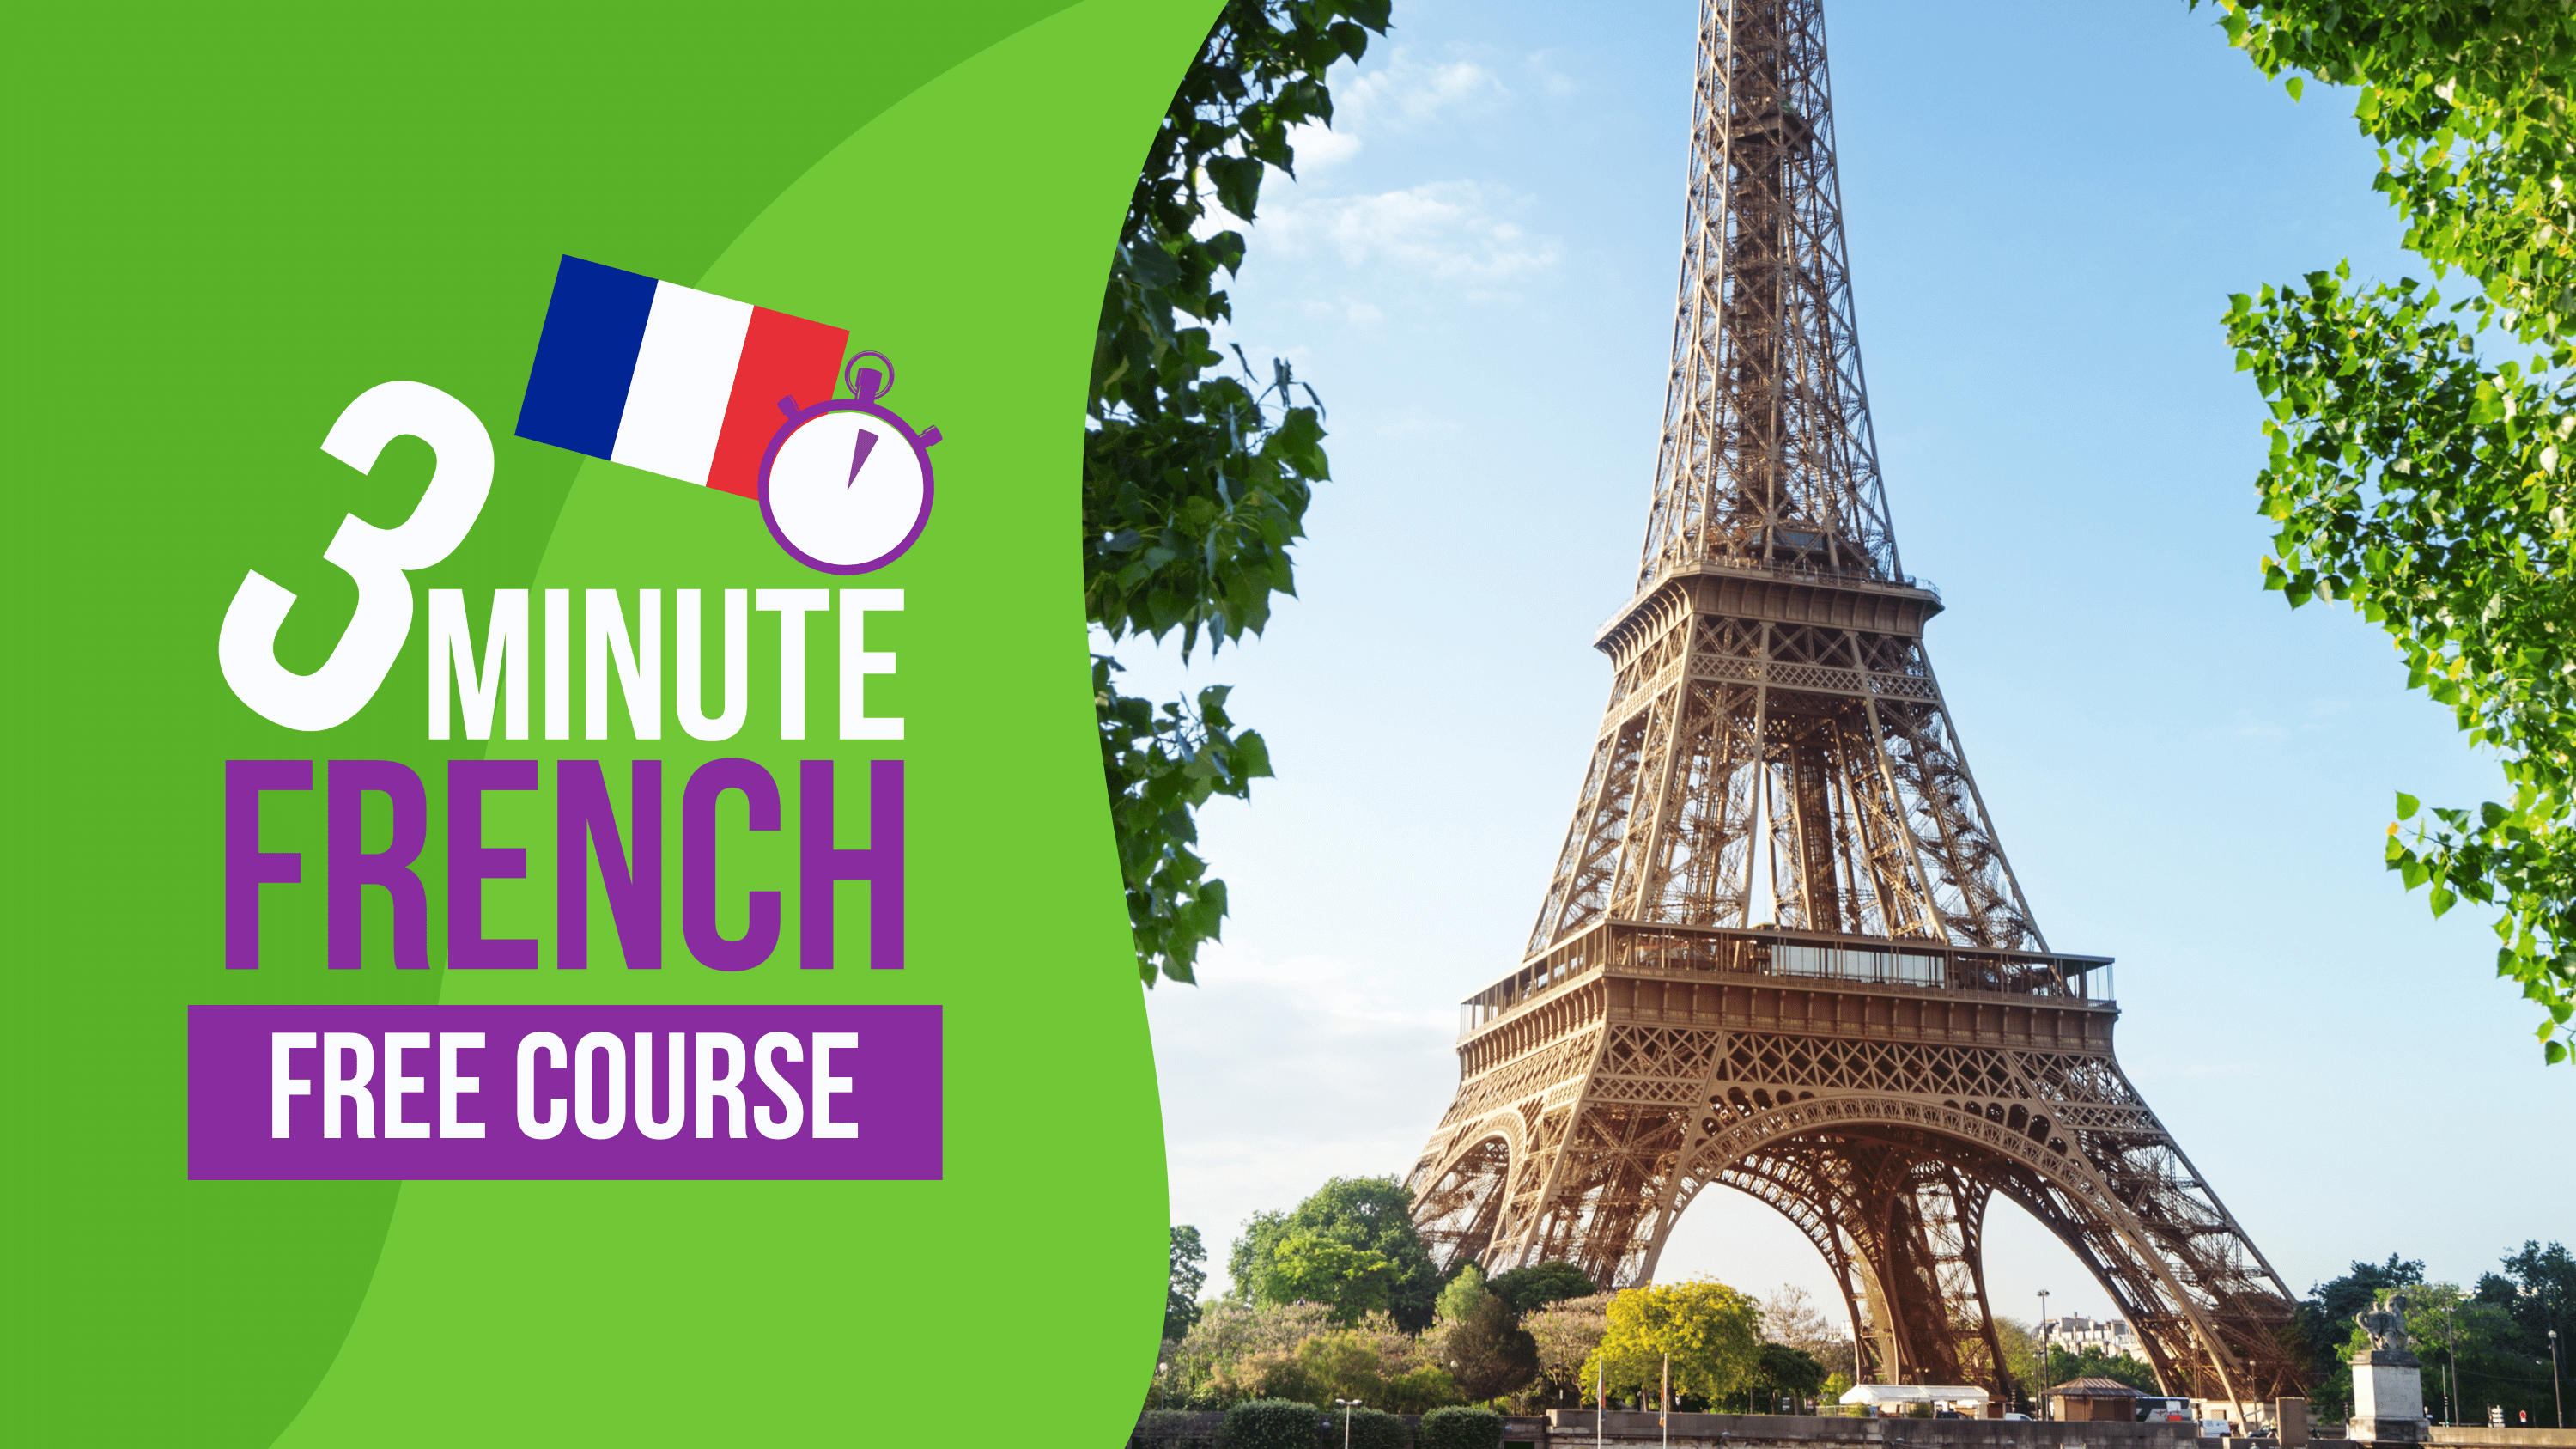 3 Minute French - Free course